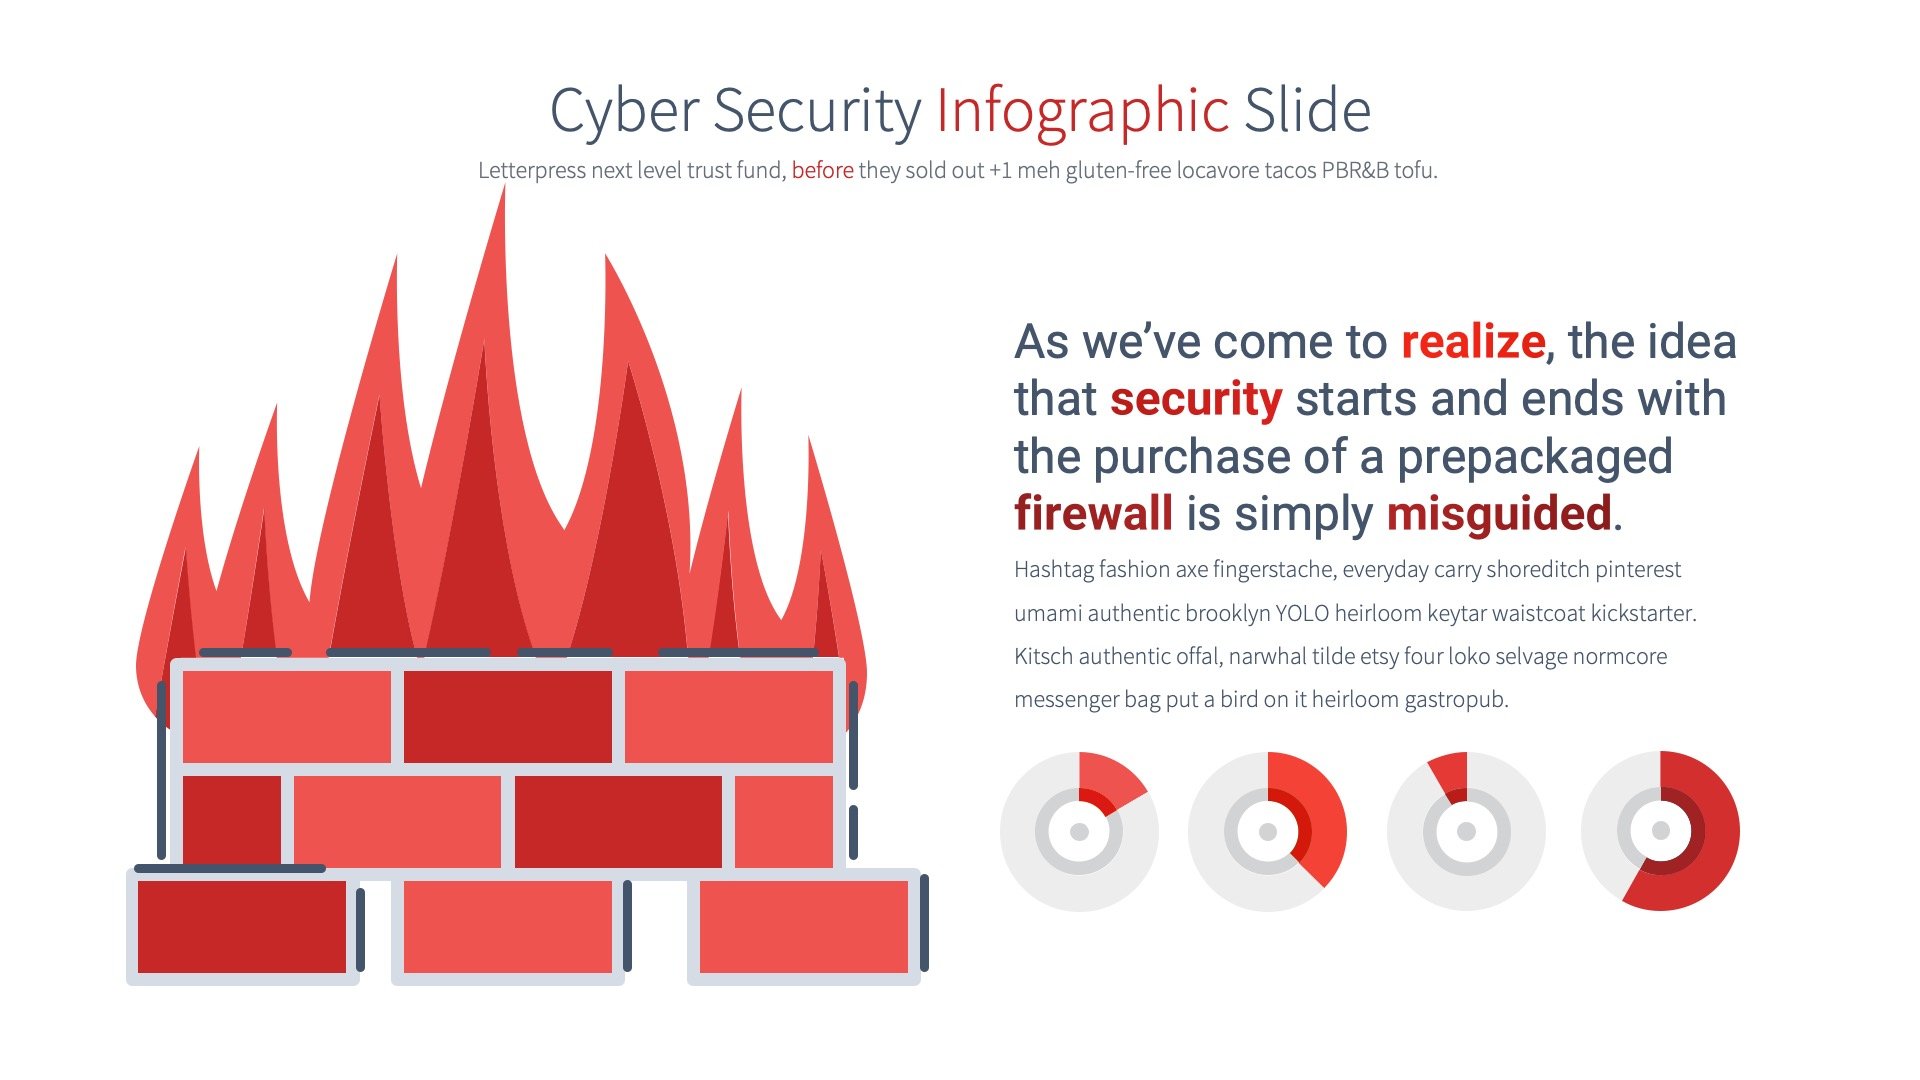 Interesting shape for describing security infographic.